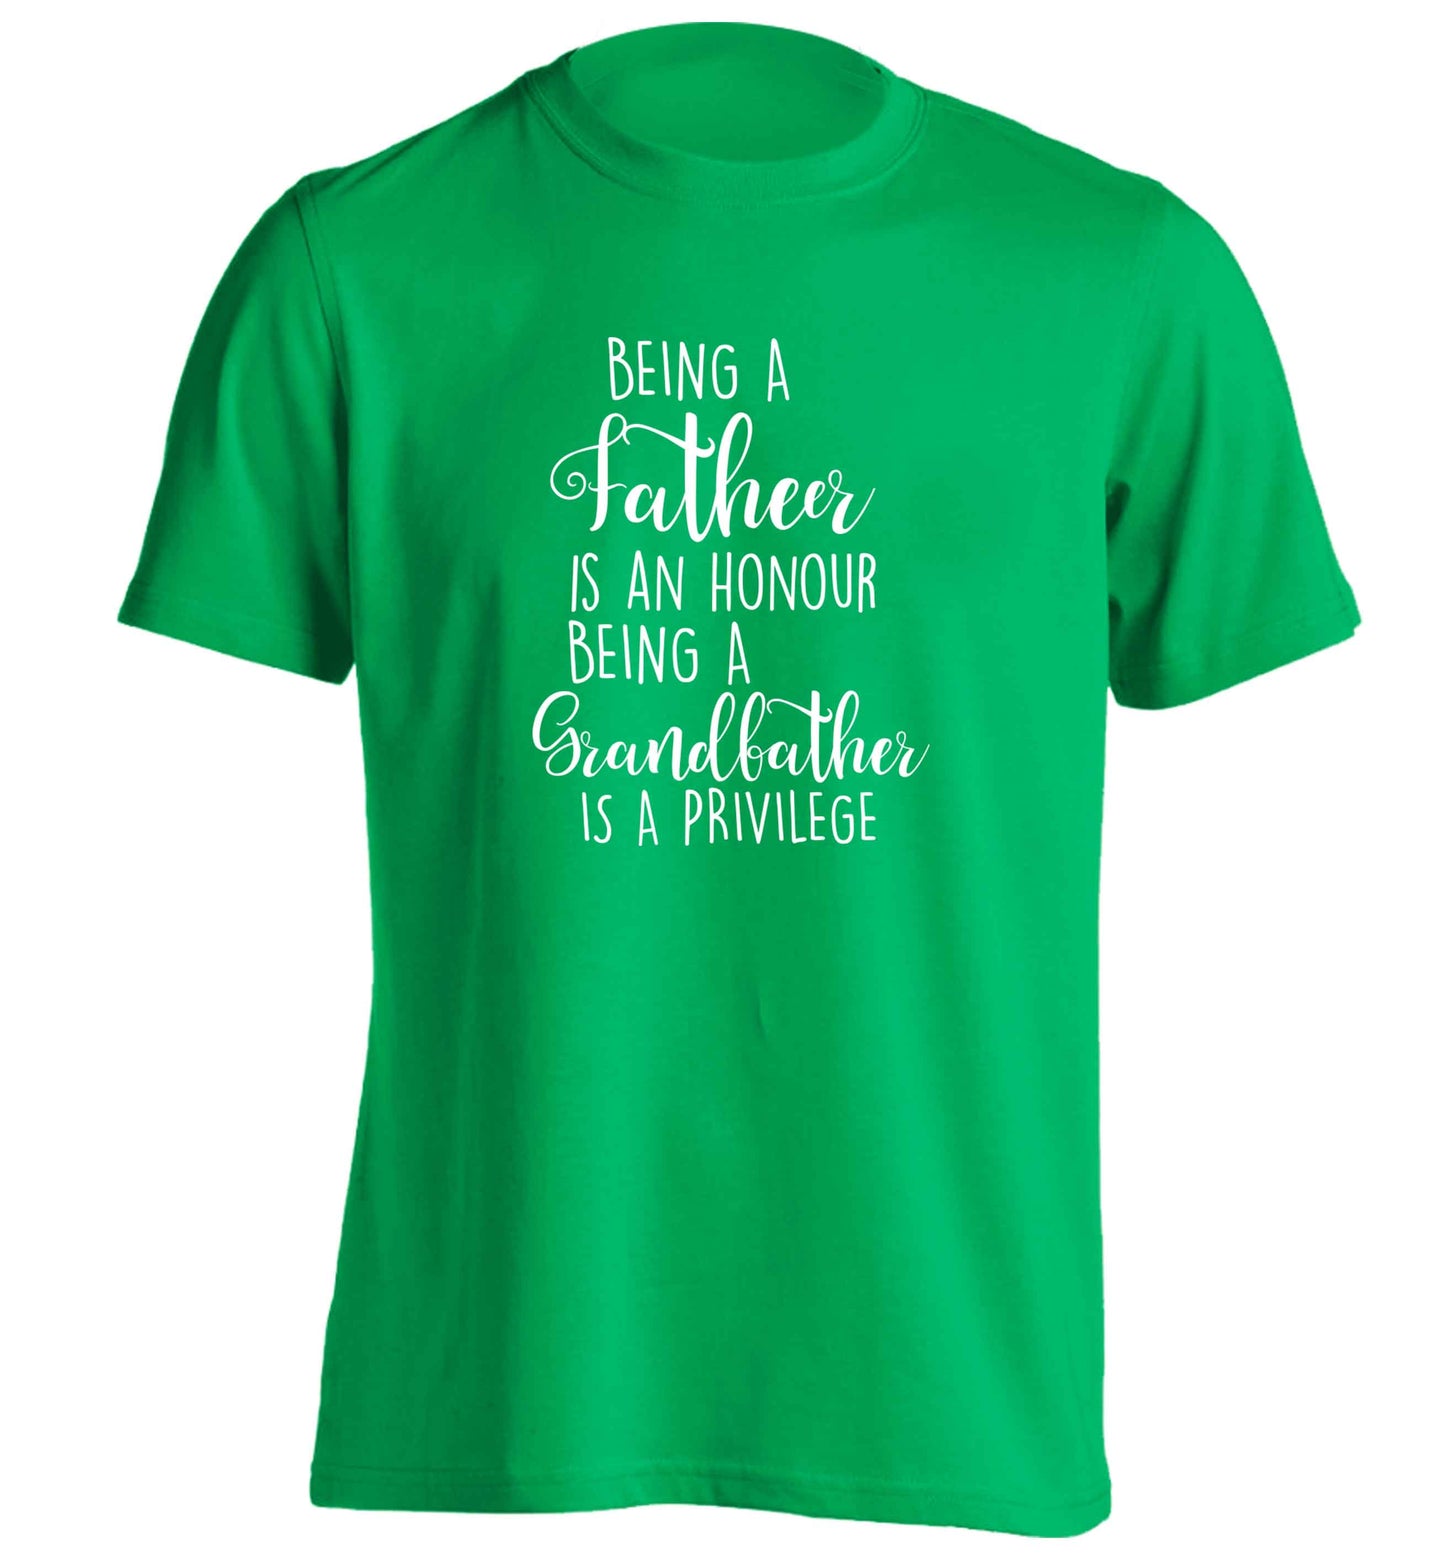 Being a father is an honour being a grandfather is a privilege adults unisex green Tshirt 2XL